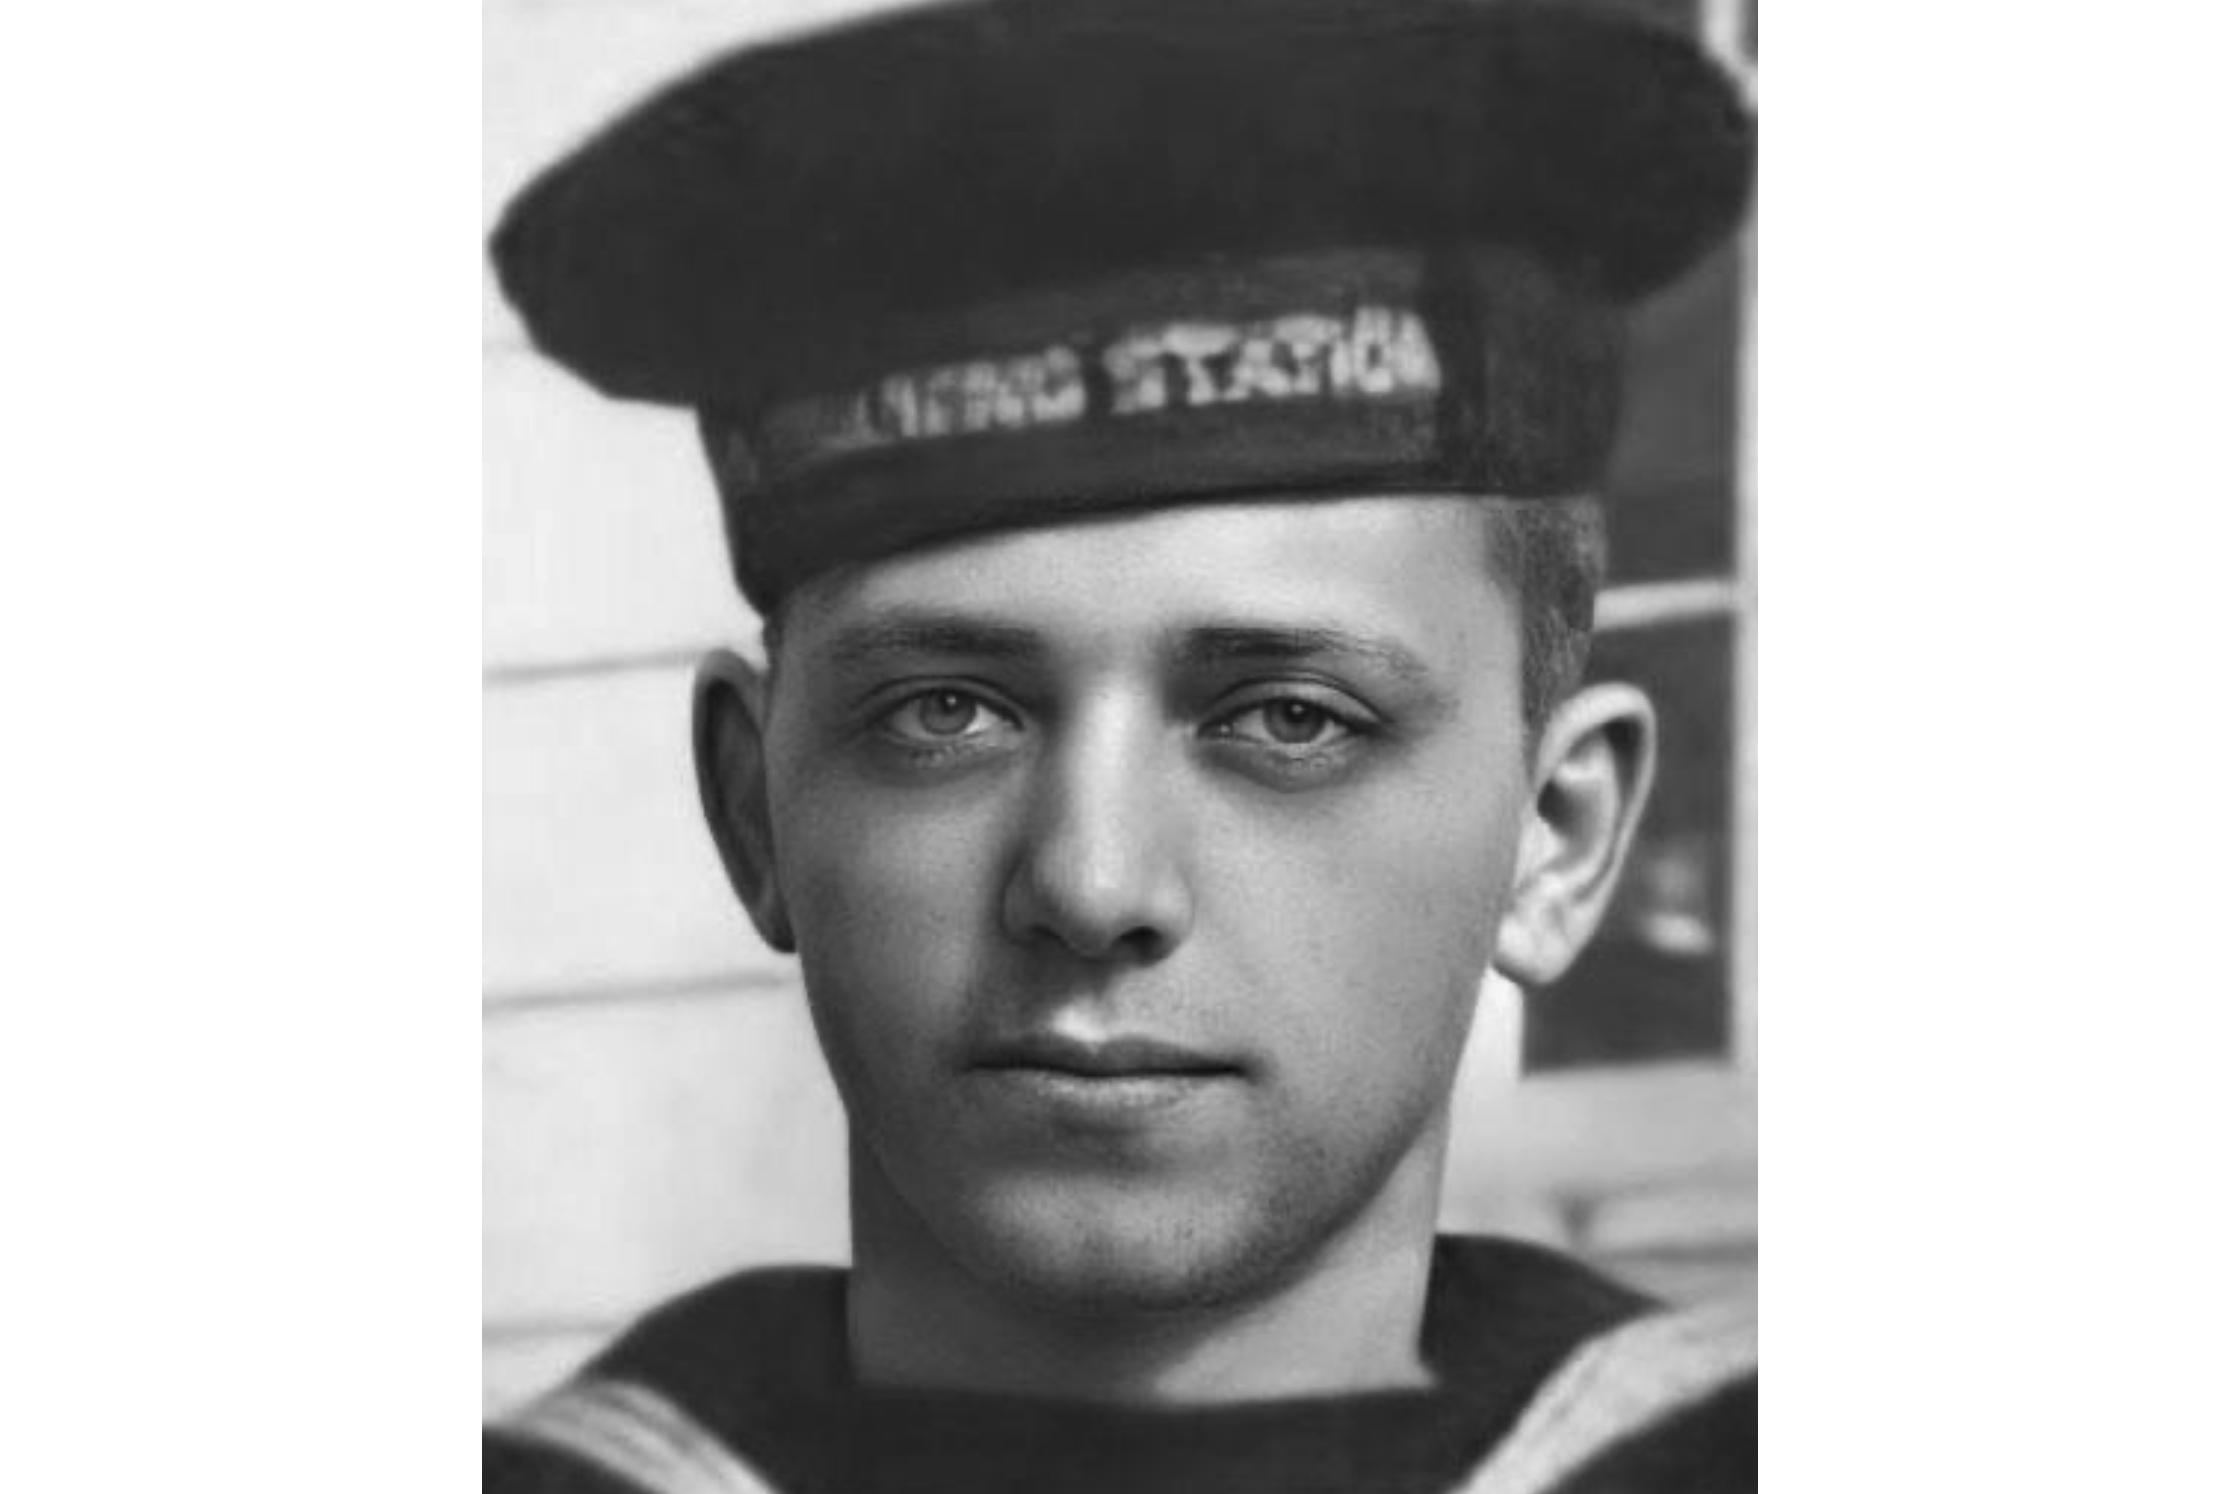 Sailor killed at Pearl Harbor to be laid to rest at last – The Associated Press